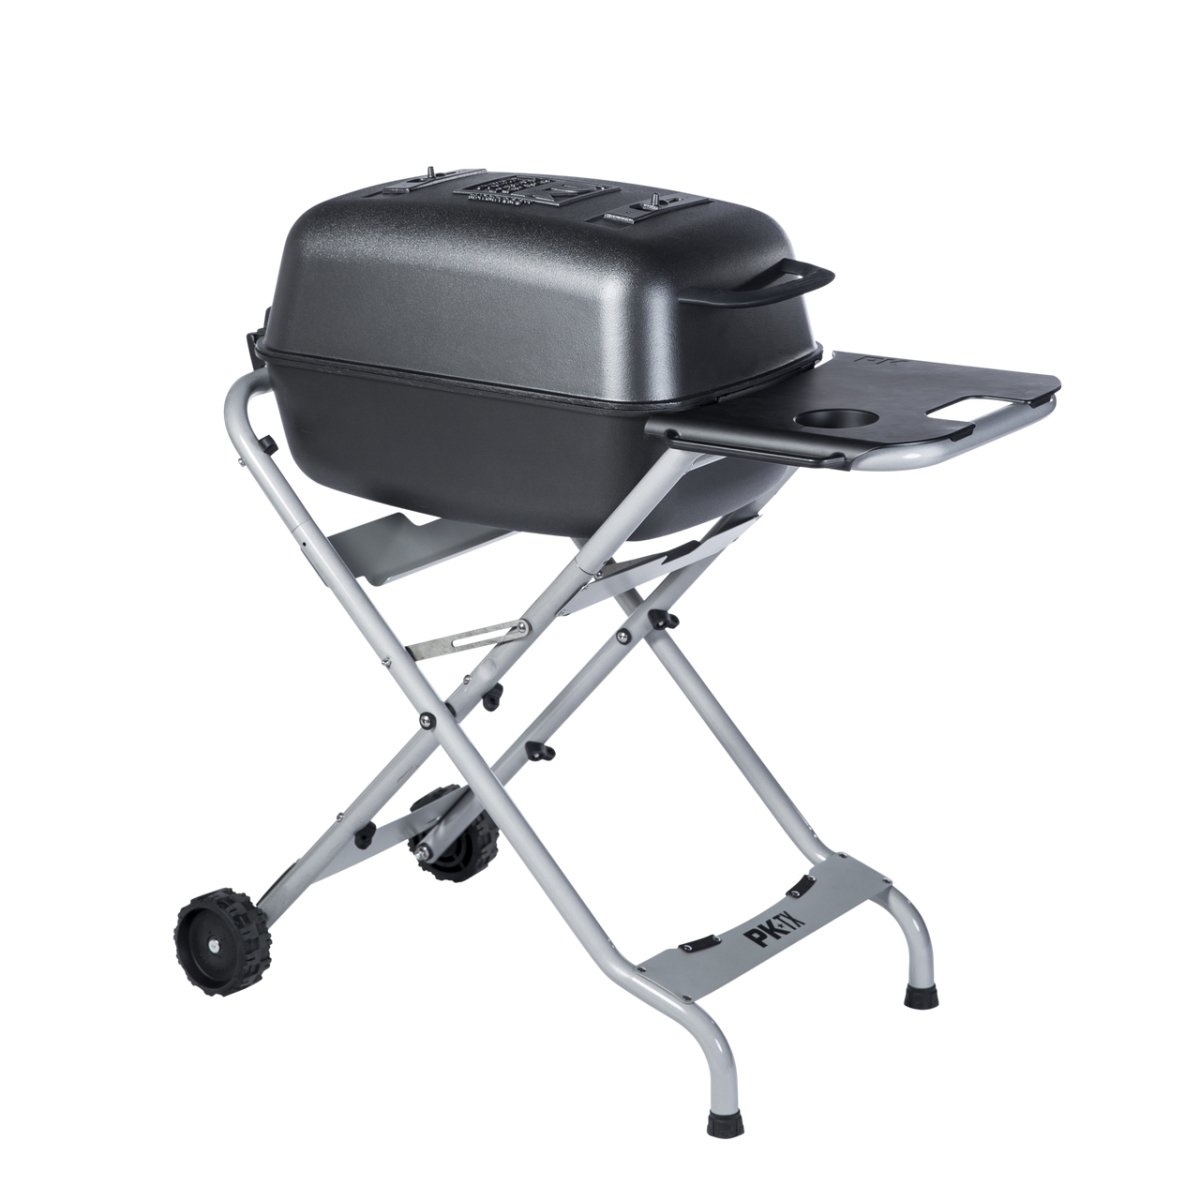 PK+TX Grill and Smoker - Silver or Graphite - Texas Star Grill Shop PKTX-GSB-X